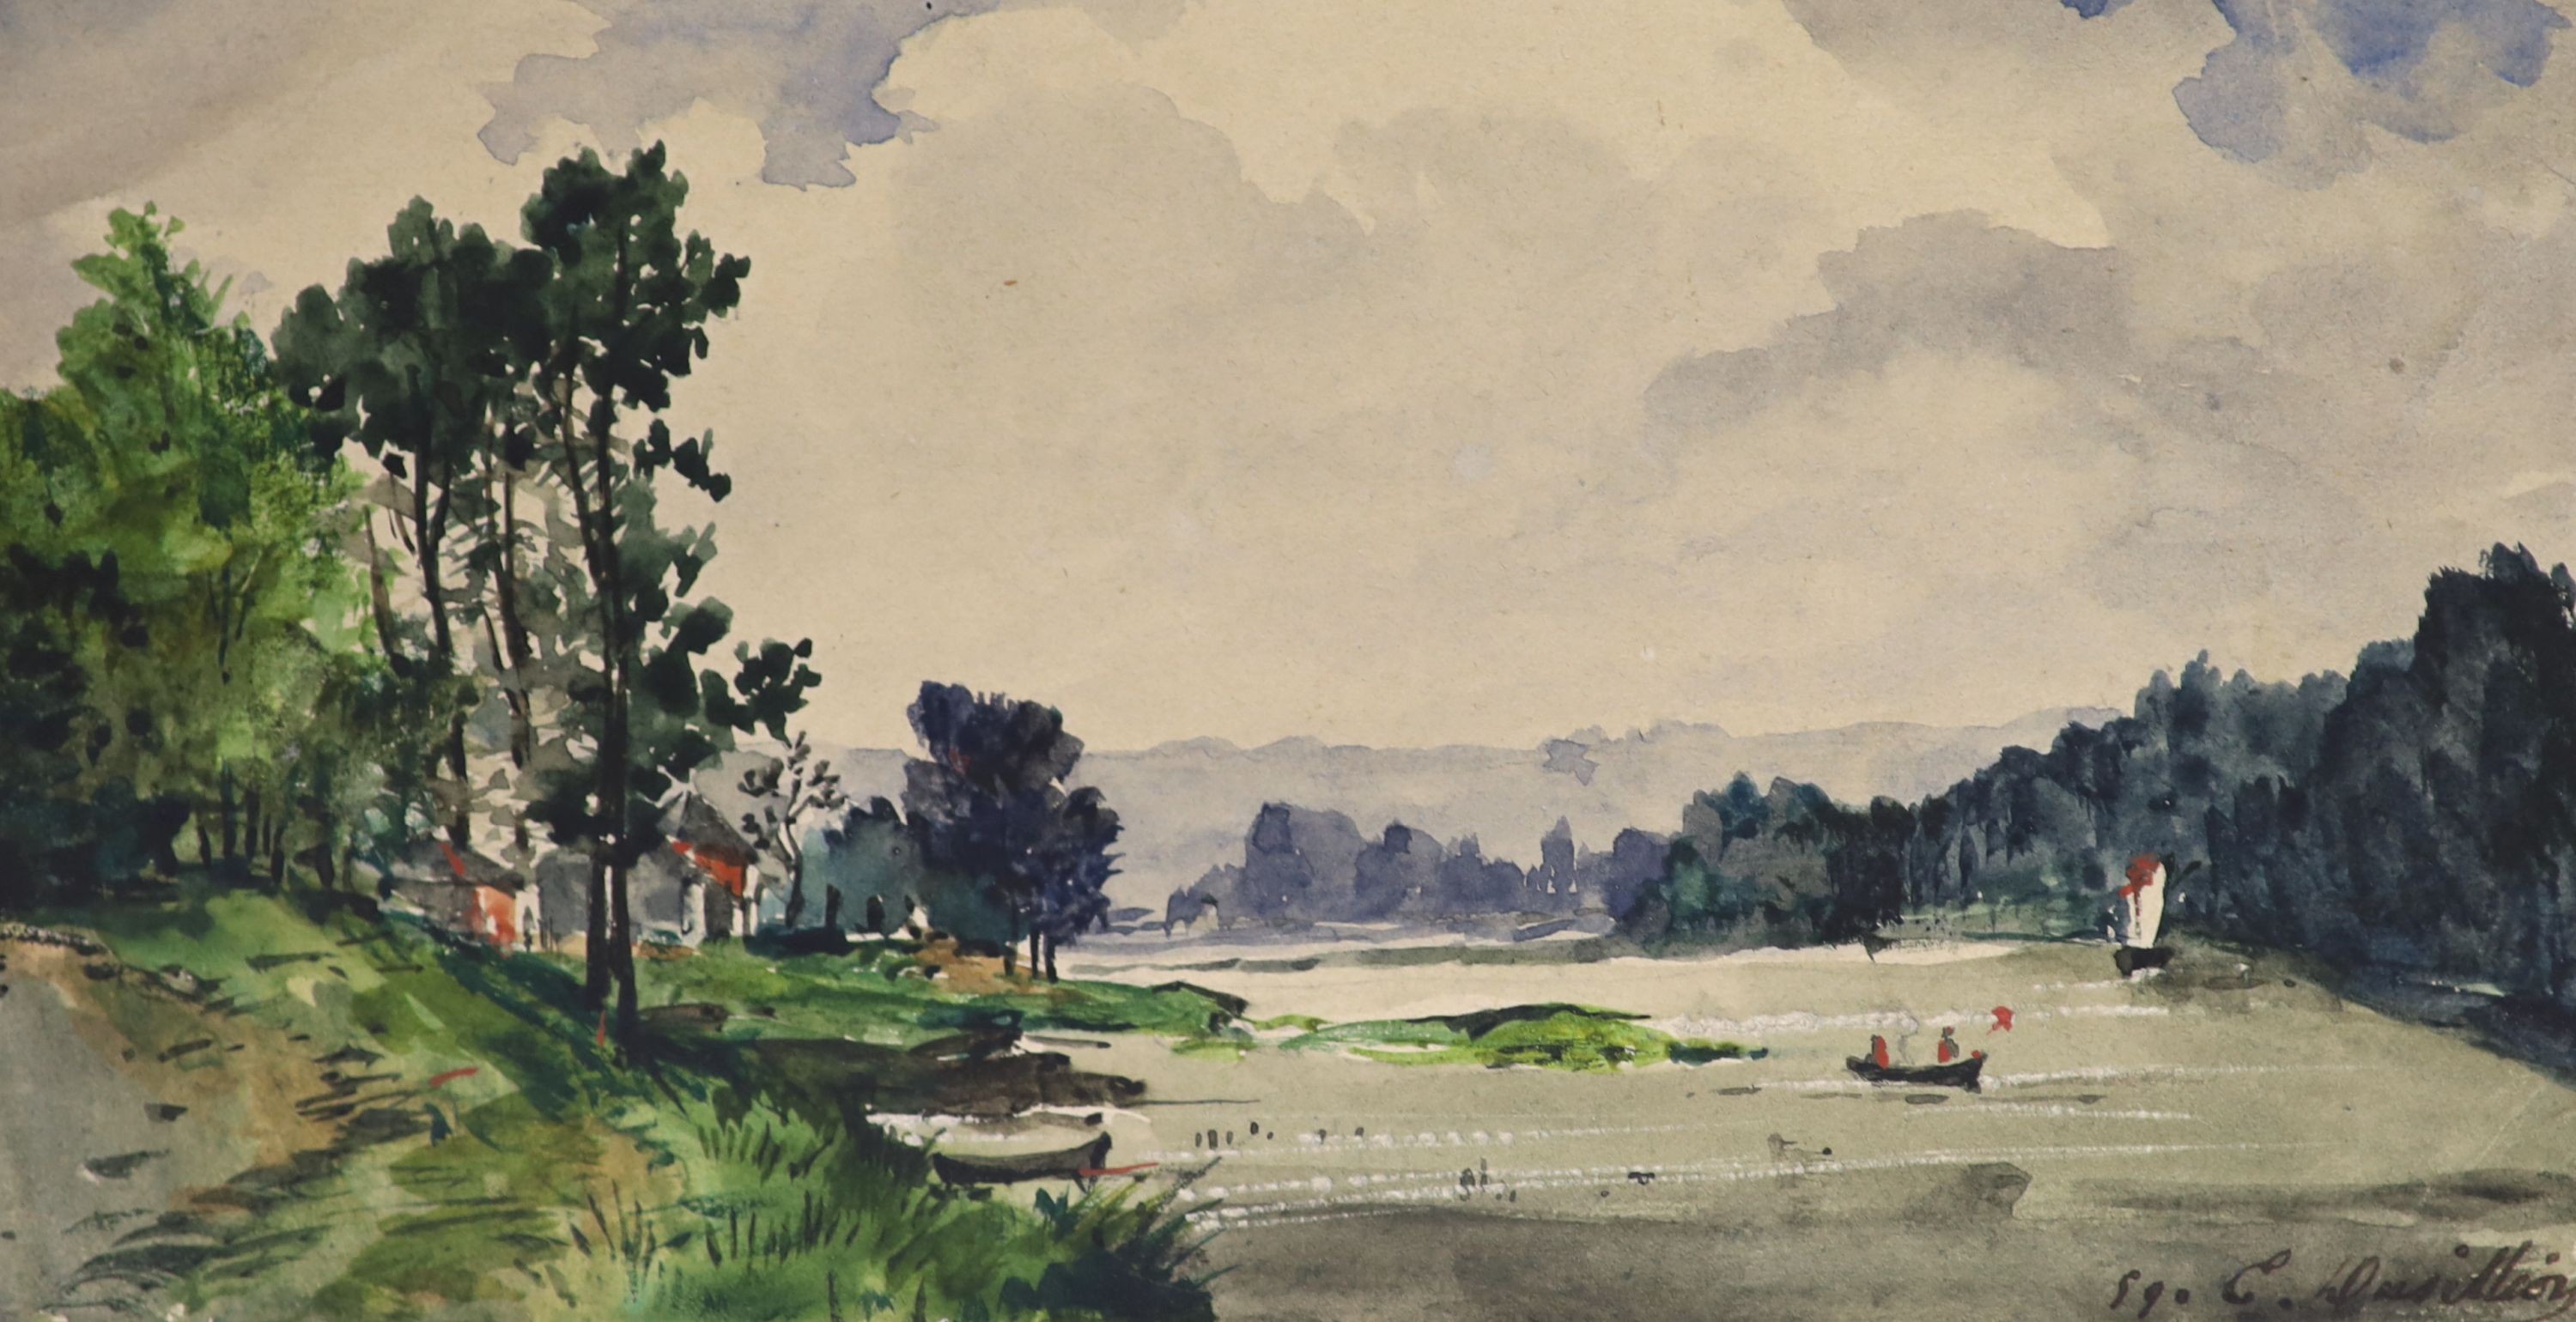 E. Dusillion (French Architect), watercolour, River landscape, signed and dated 1859, 8 x 15cm, unframed